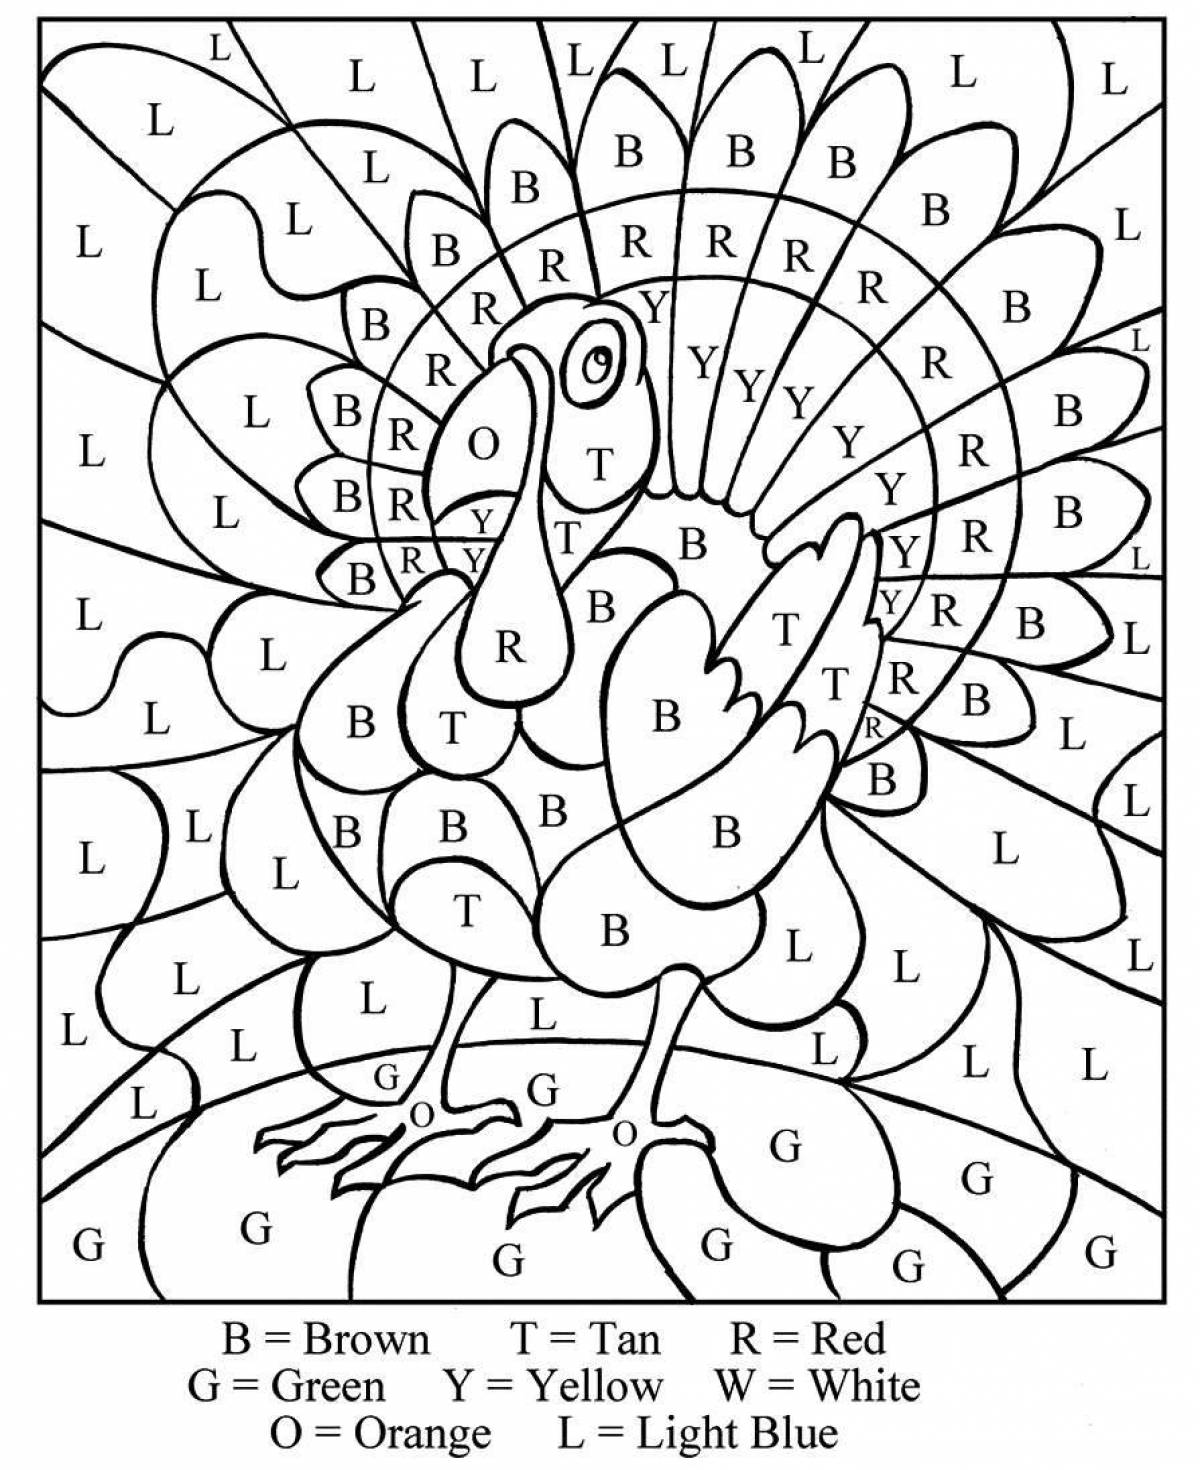 A fun coloring book for beginners